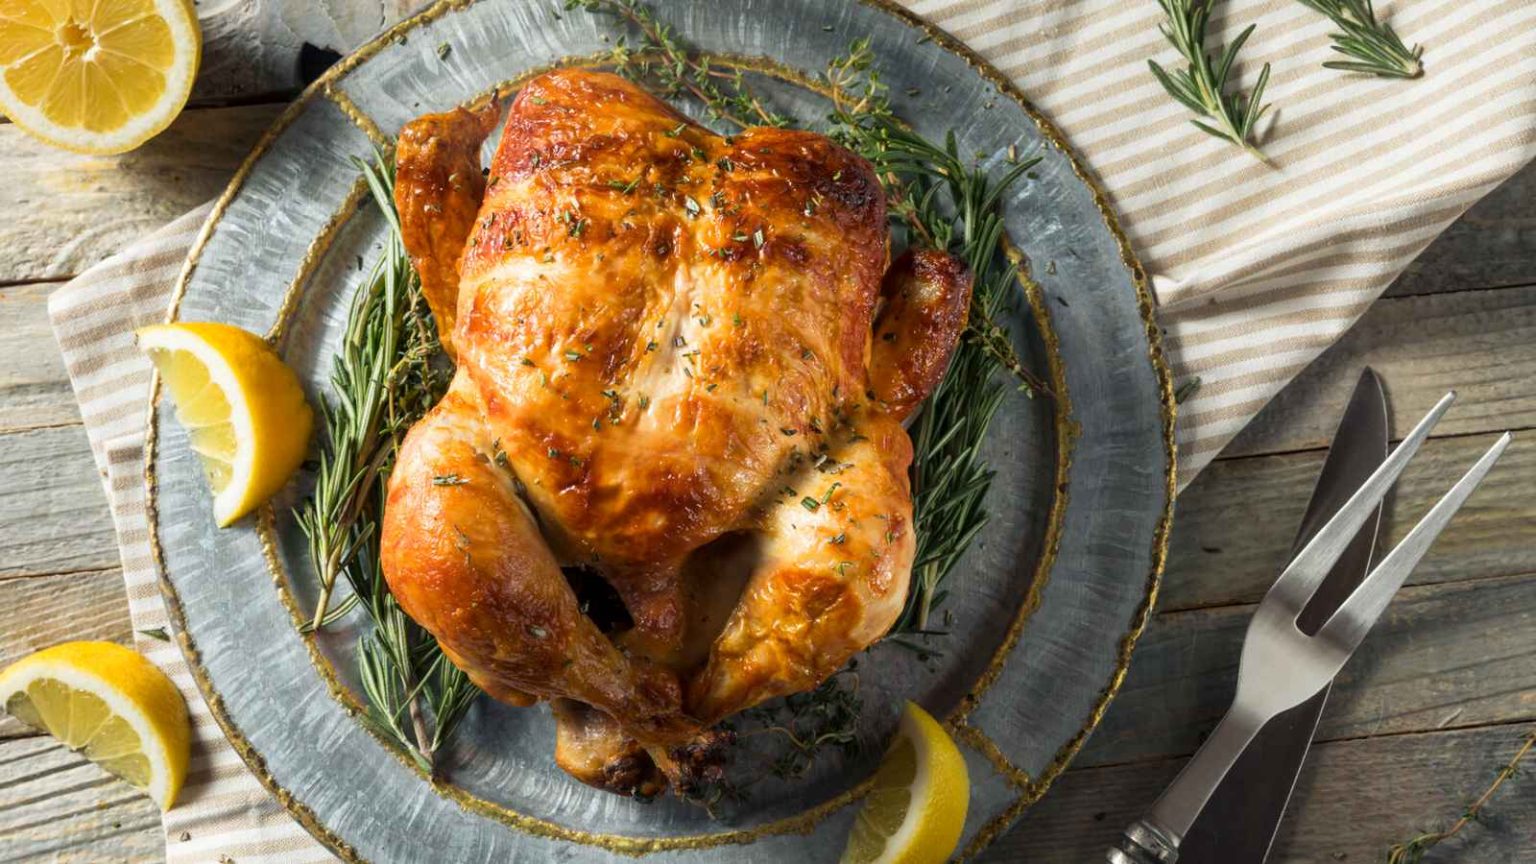 National Rotisserie Chicken Day 2023 Date, History, Facts about